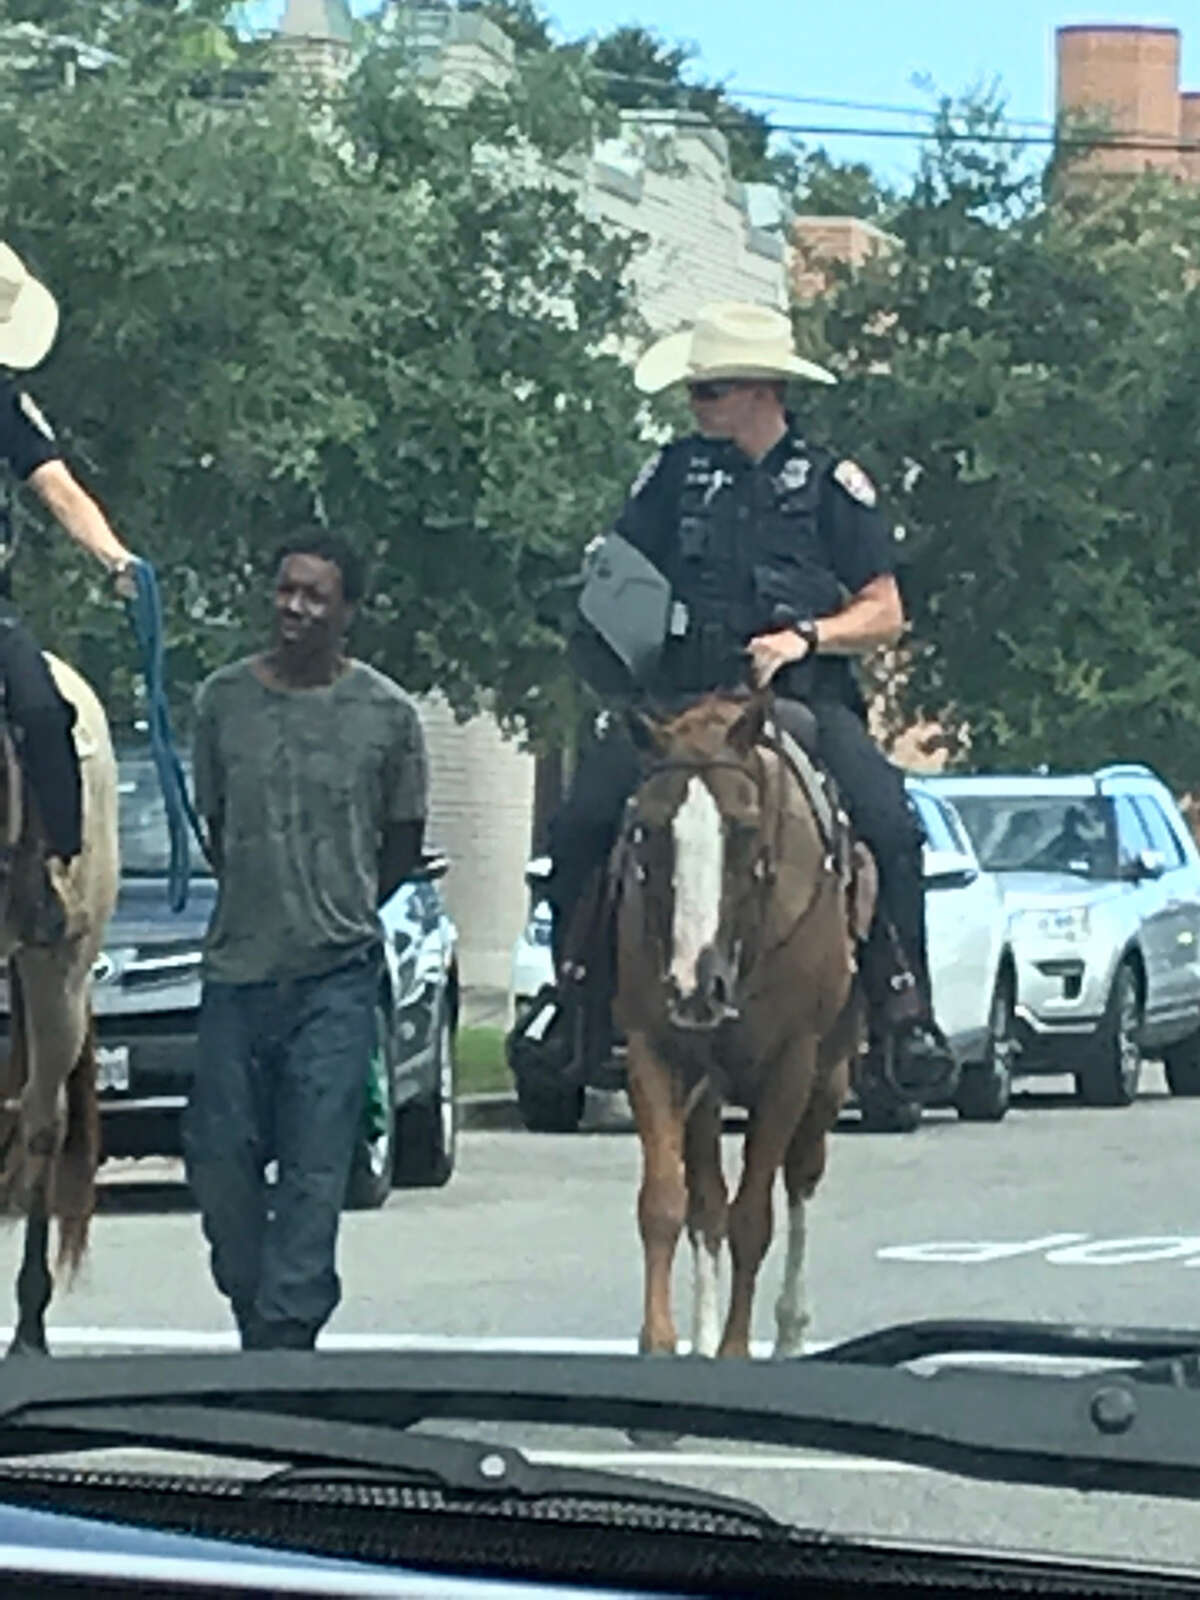 A man is led to jail by two Galveston police officers on horseback on Saturday. >> Click through the following gallery to see recent racist and controversial incidents in Houston and the rest of Texas.